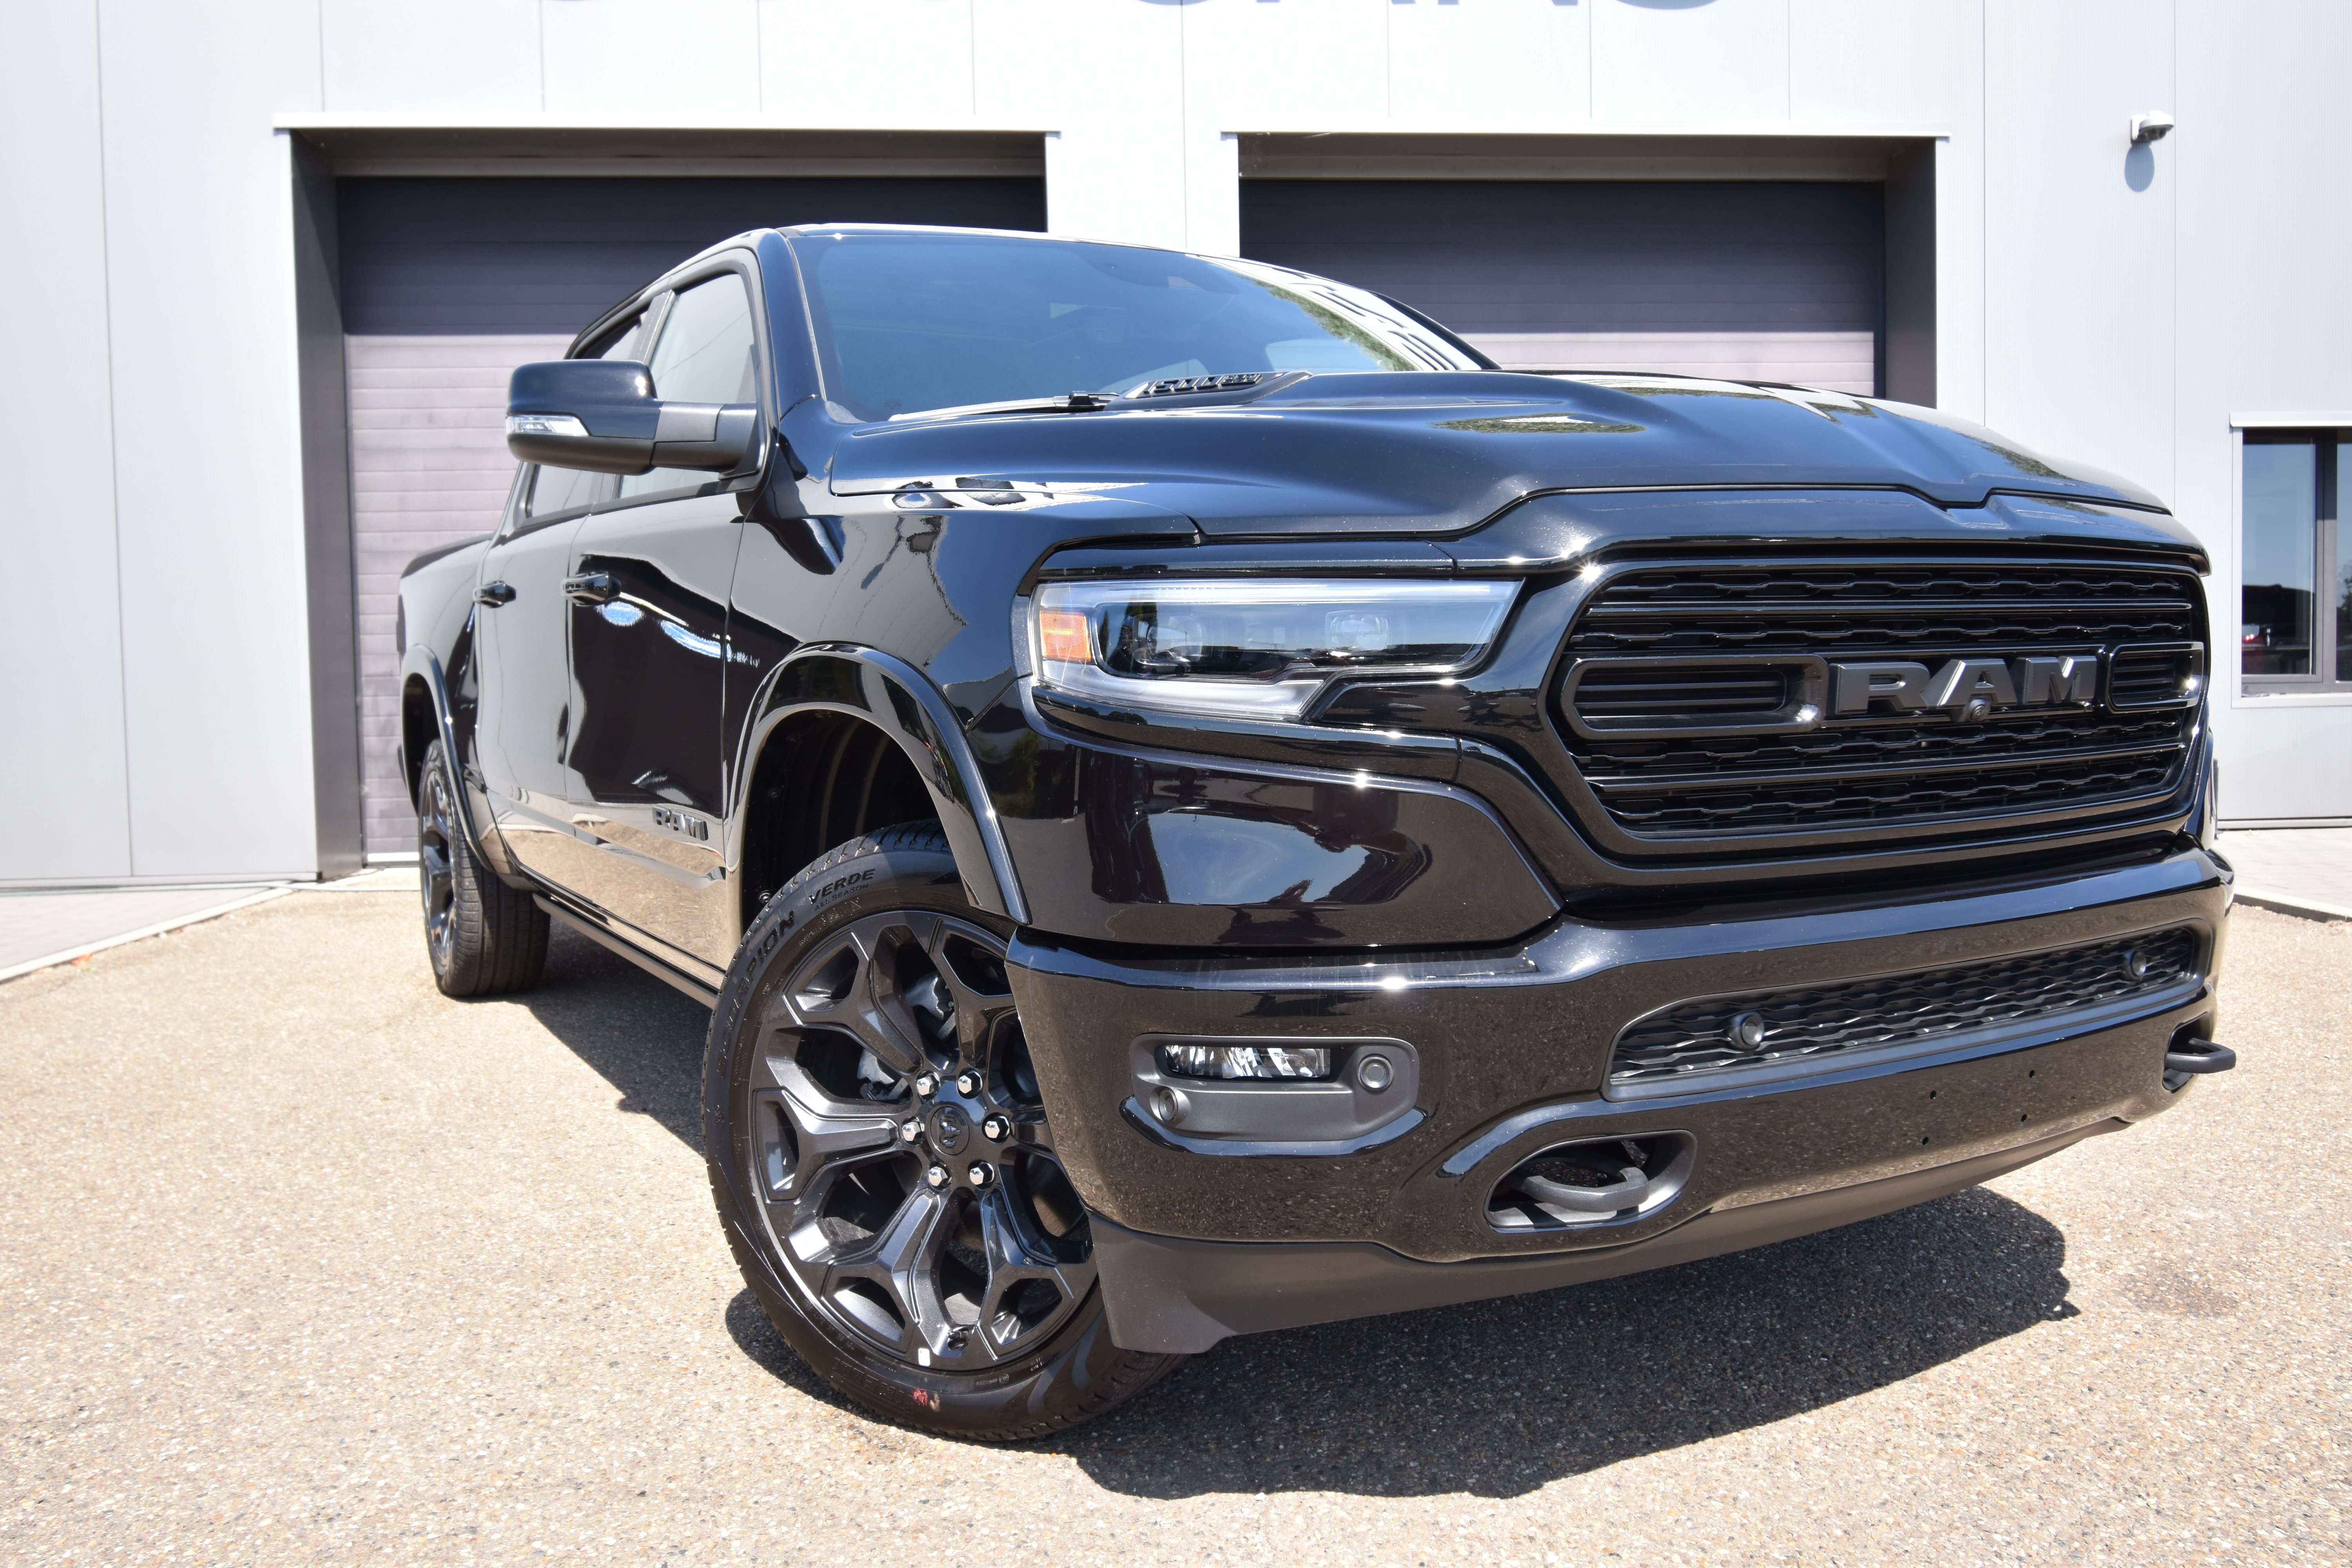 RAM 1500 Off-Road/Pick-up in Black new in Massenhoven for € 95,469.-